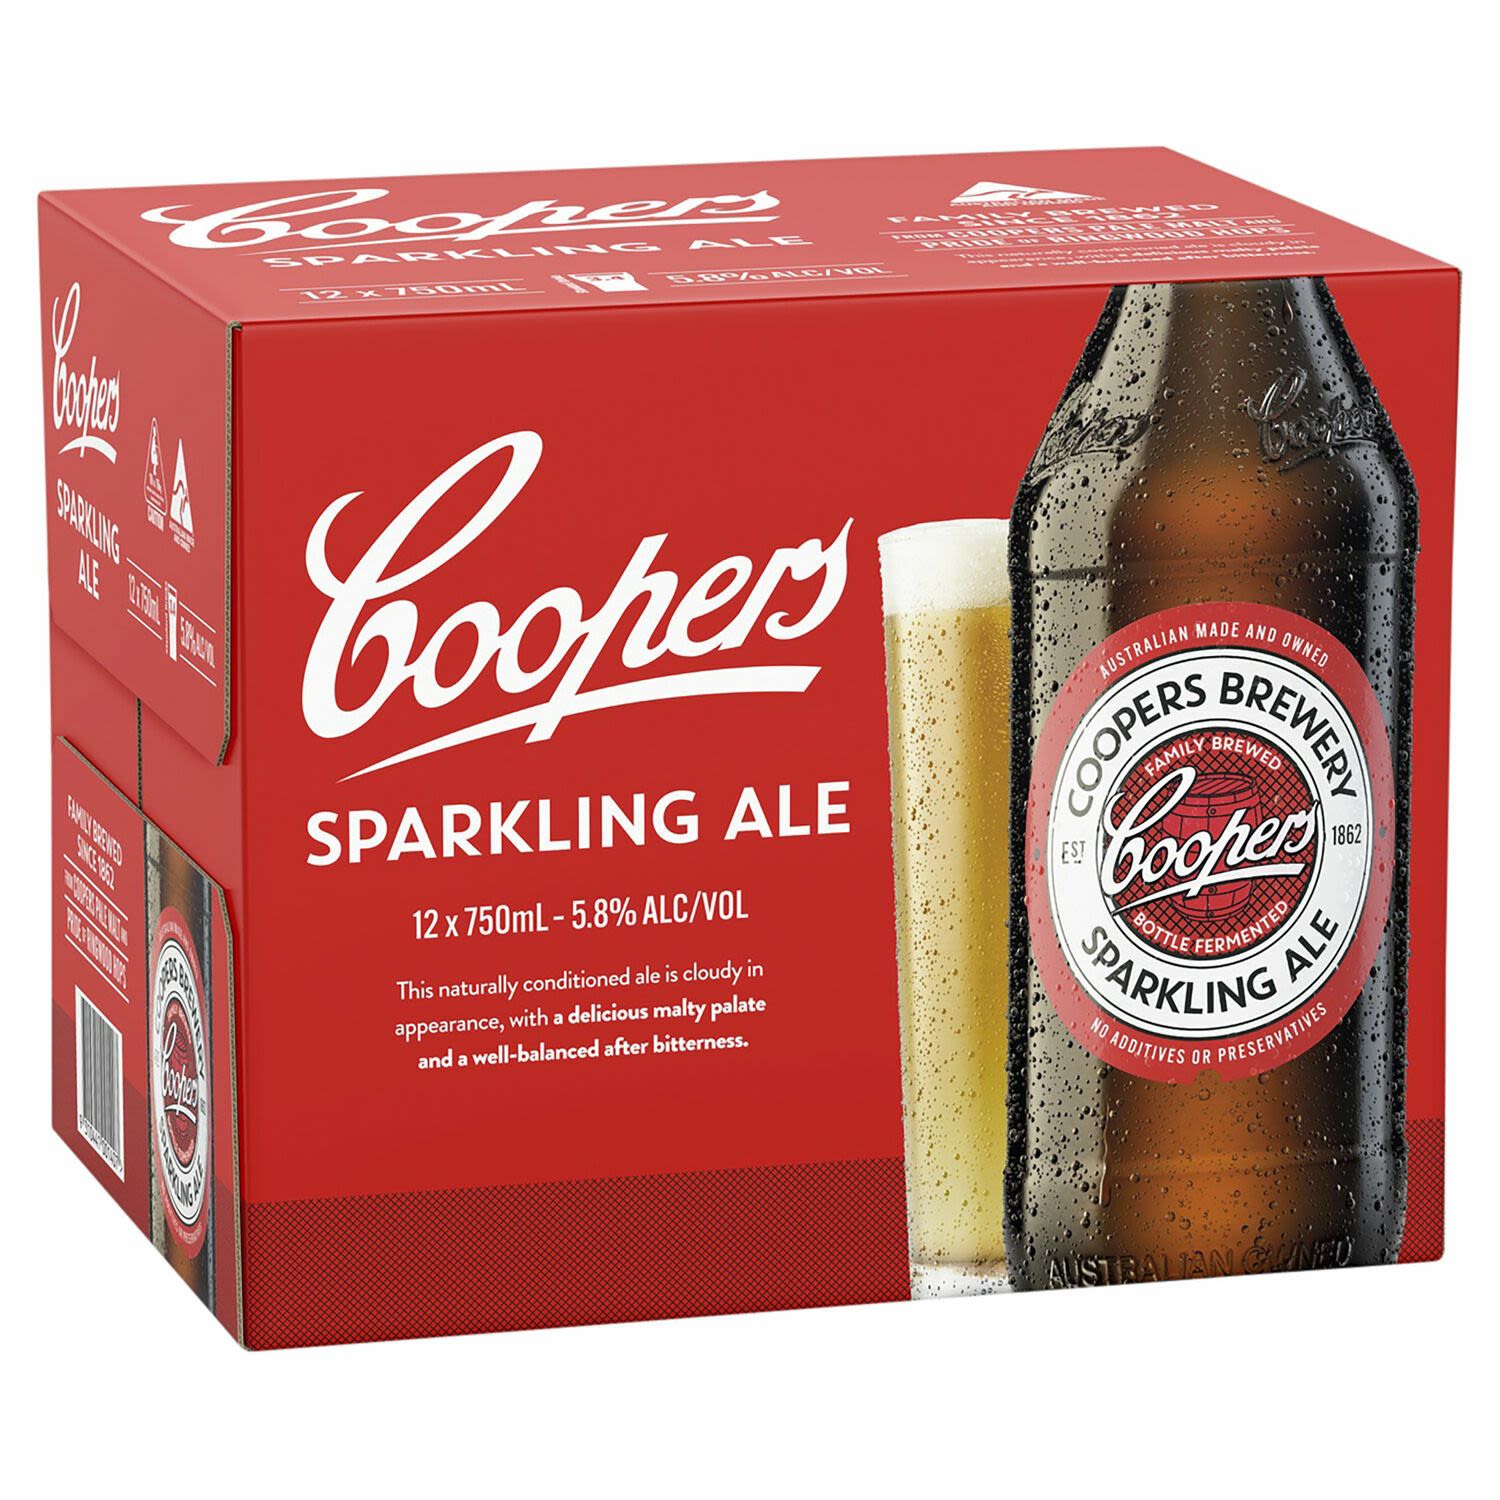 Coopers Sparkling Ale Bottle 750mL 12 Pack